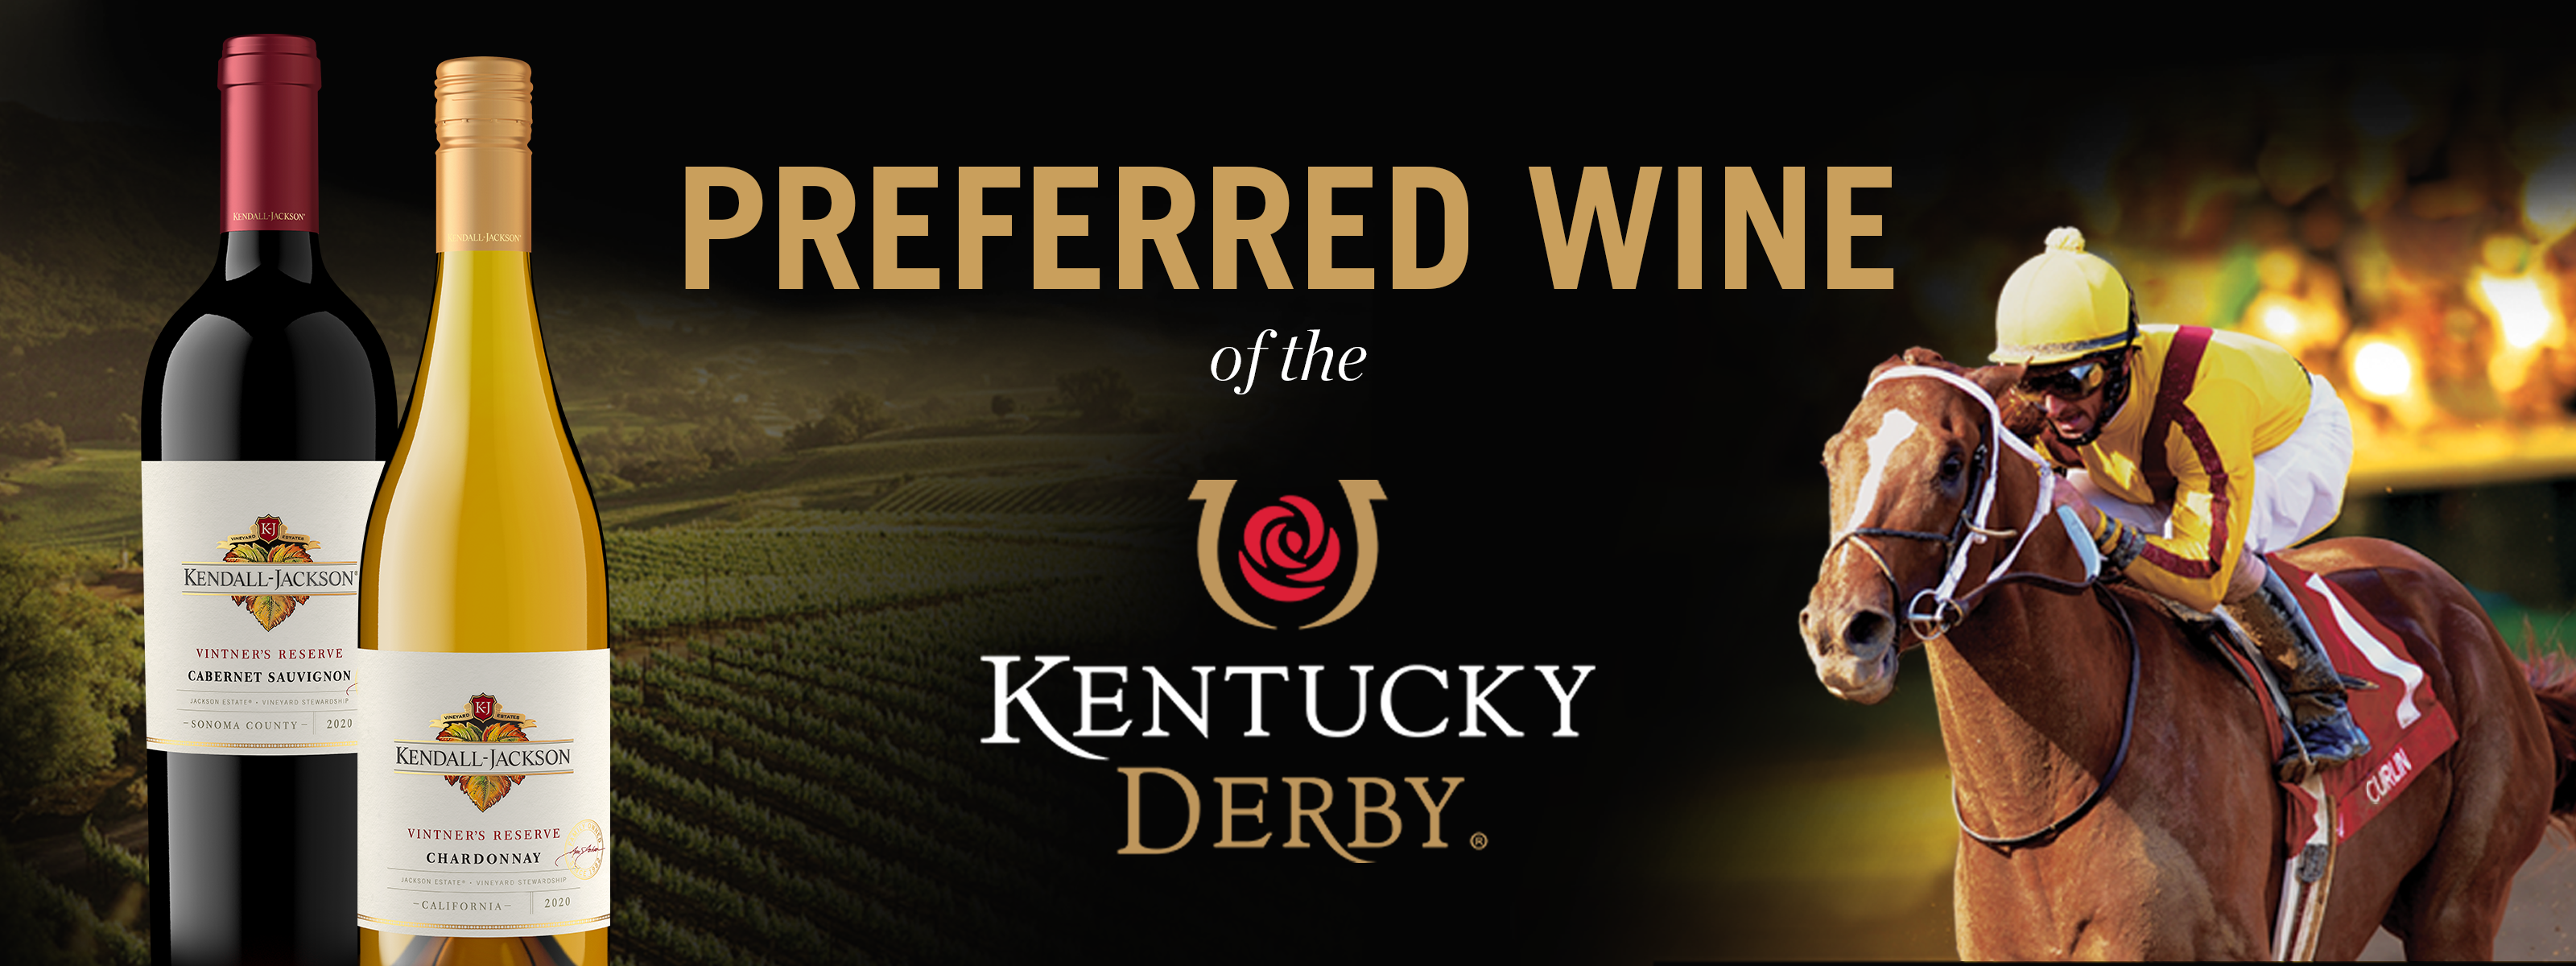 Kendall-Jackson Wines | Preferred Wine of the Kentucky Derby